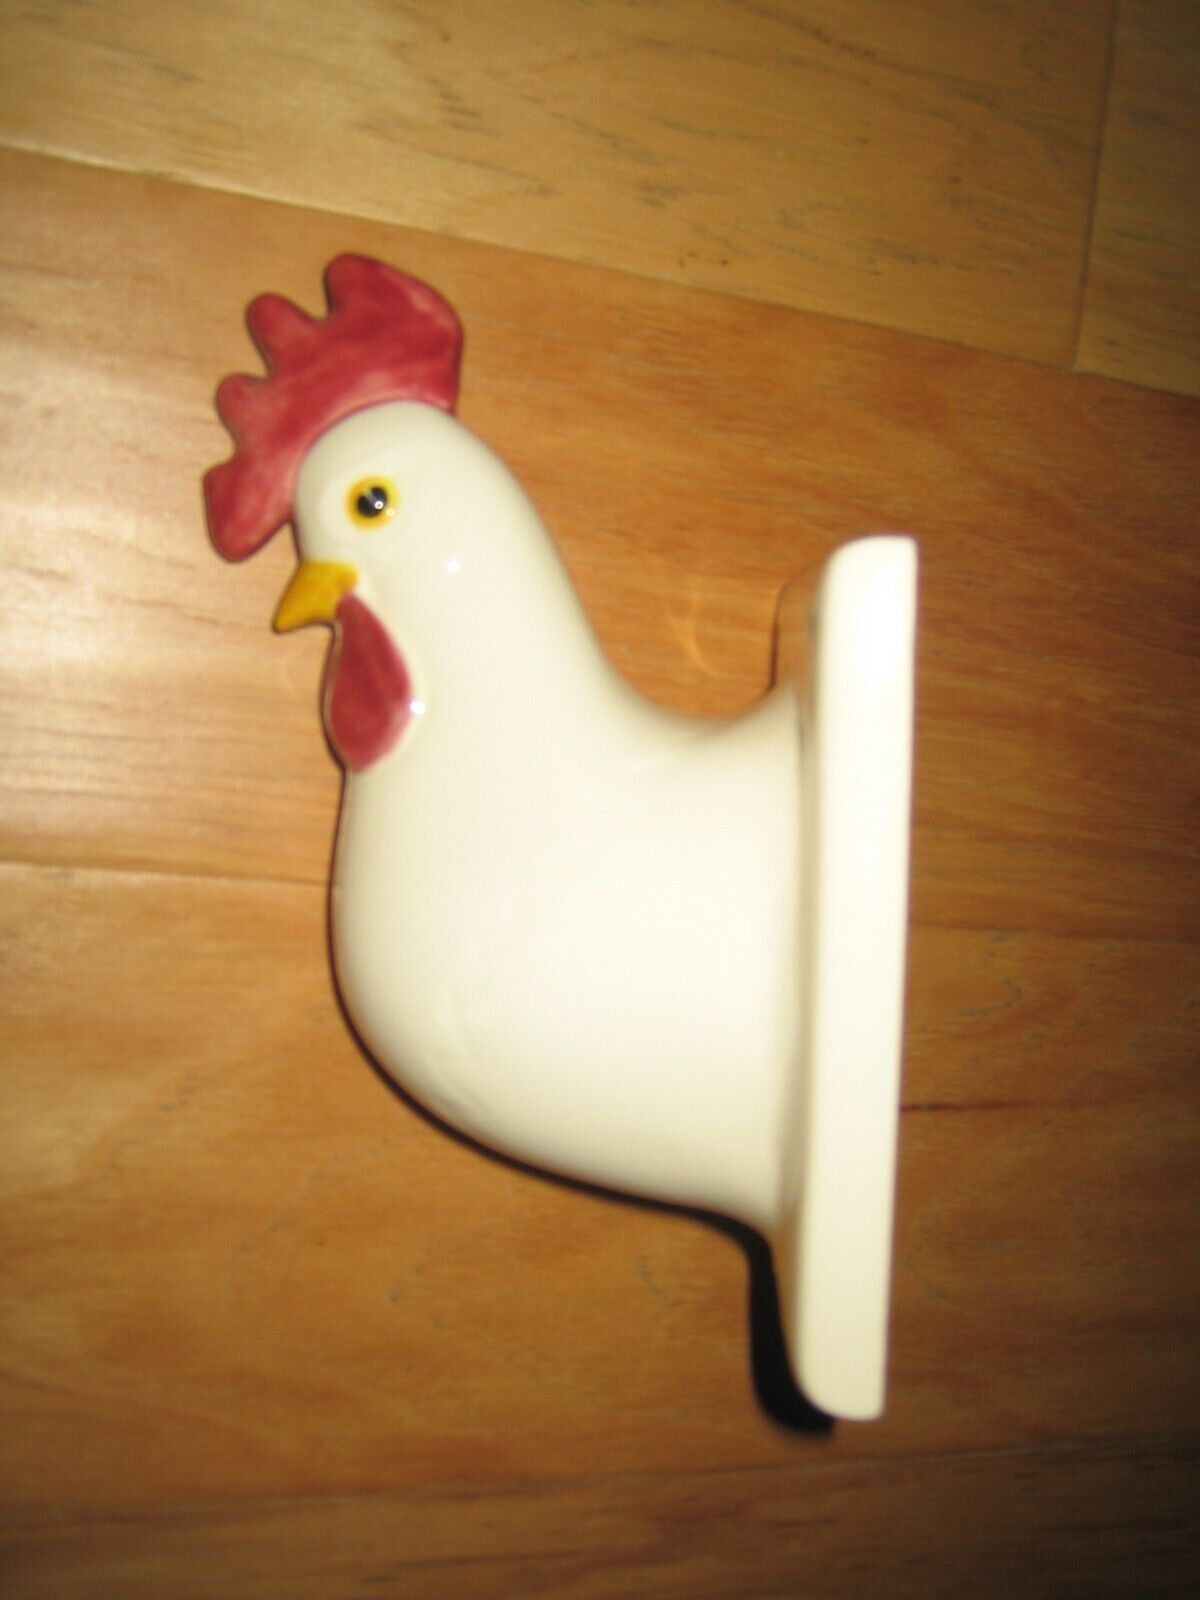 VNTG Kitchen Ceramic Rooster Towel Apron Holder  White Red Wall L Murray Design